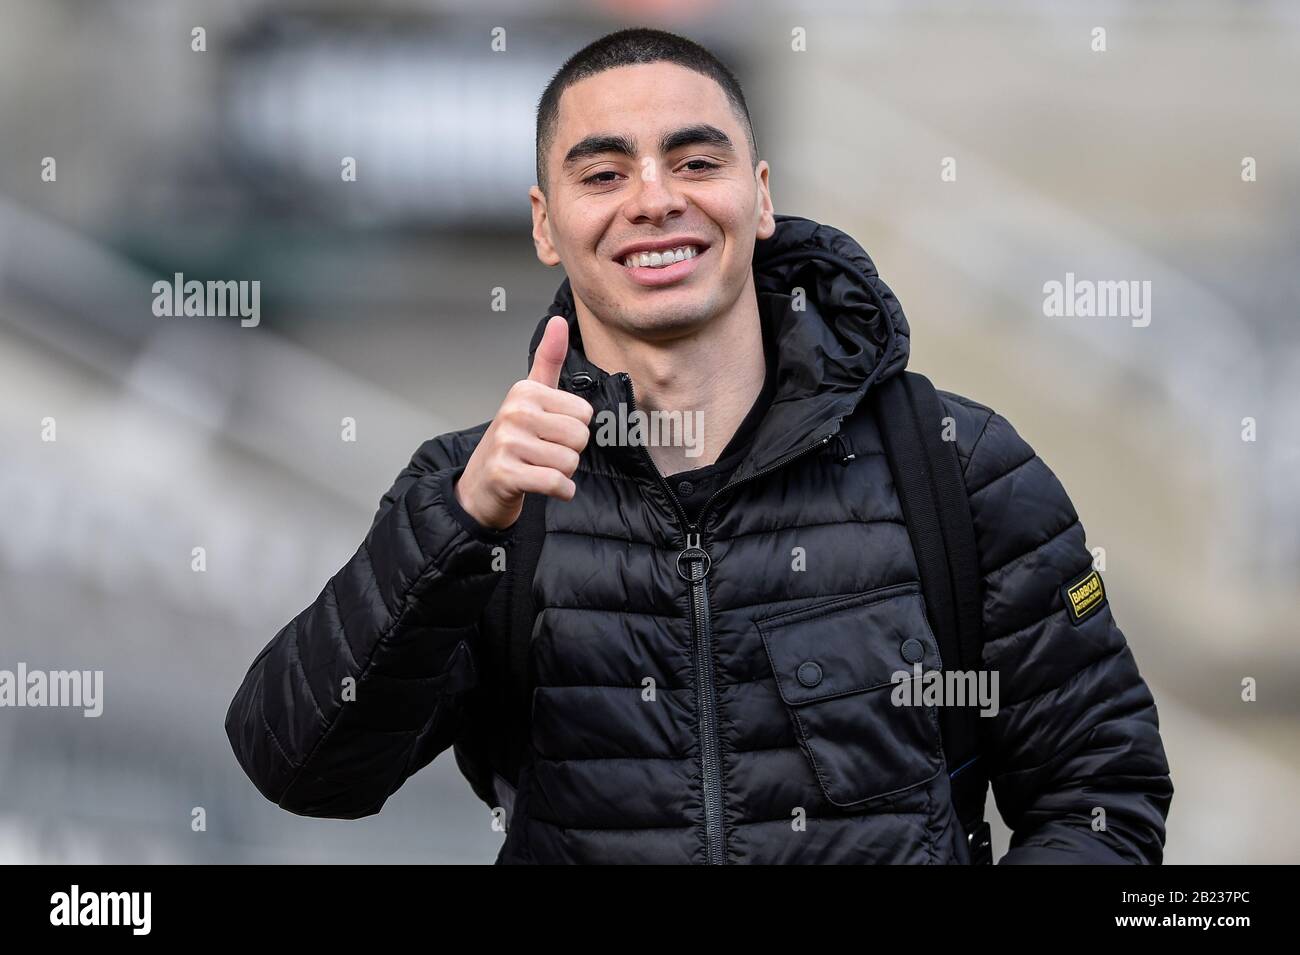 NEWCASTLE UPON TYNE, ENGLAND - FEBRUARY 29TH Miguel Almir-n (24) of Newcastle United arriving before the Premier League match between Newcastle United and Burnley at St. James's Park, Newcastle on Saturday 29th February 2020. (Credit: Iam Burn | MI News) Photograph may only be used for newspaper and/or magazine editorial purposes, license required for commercial use Credit: MI News & Sport /Alamy Live News Stock Photo